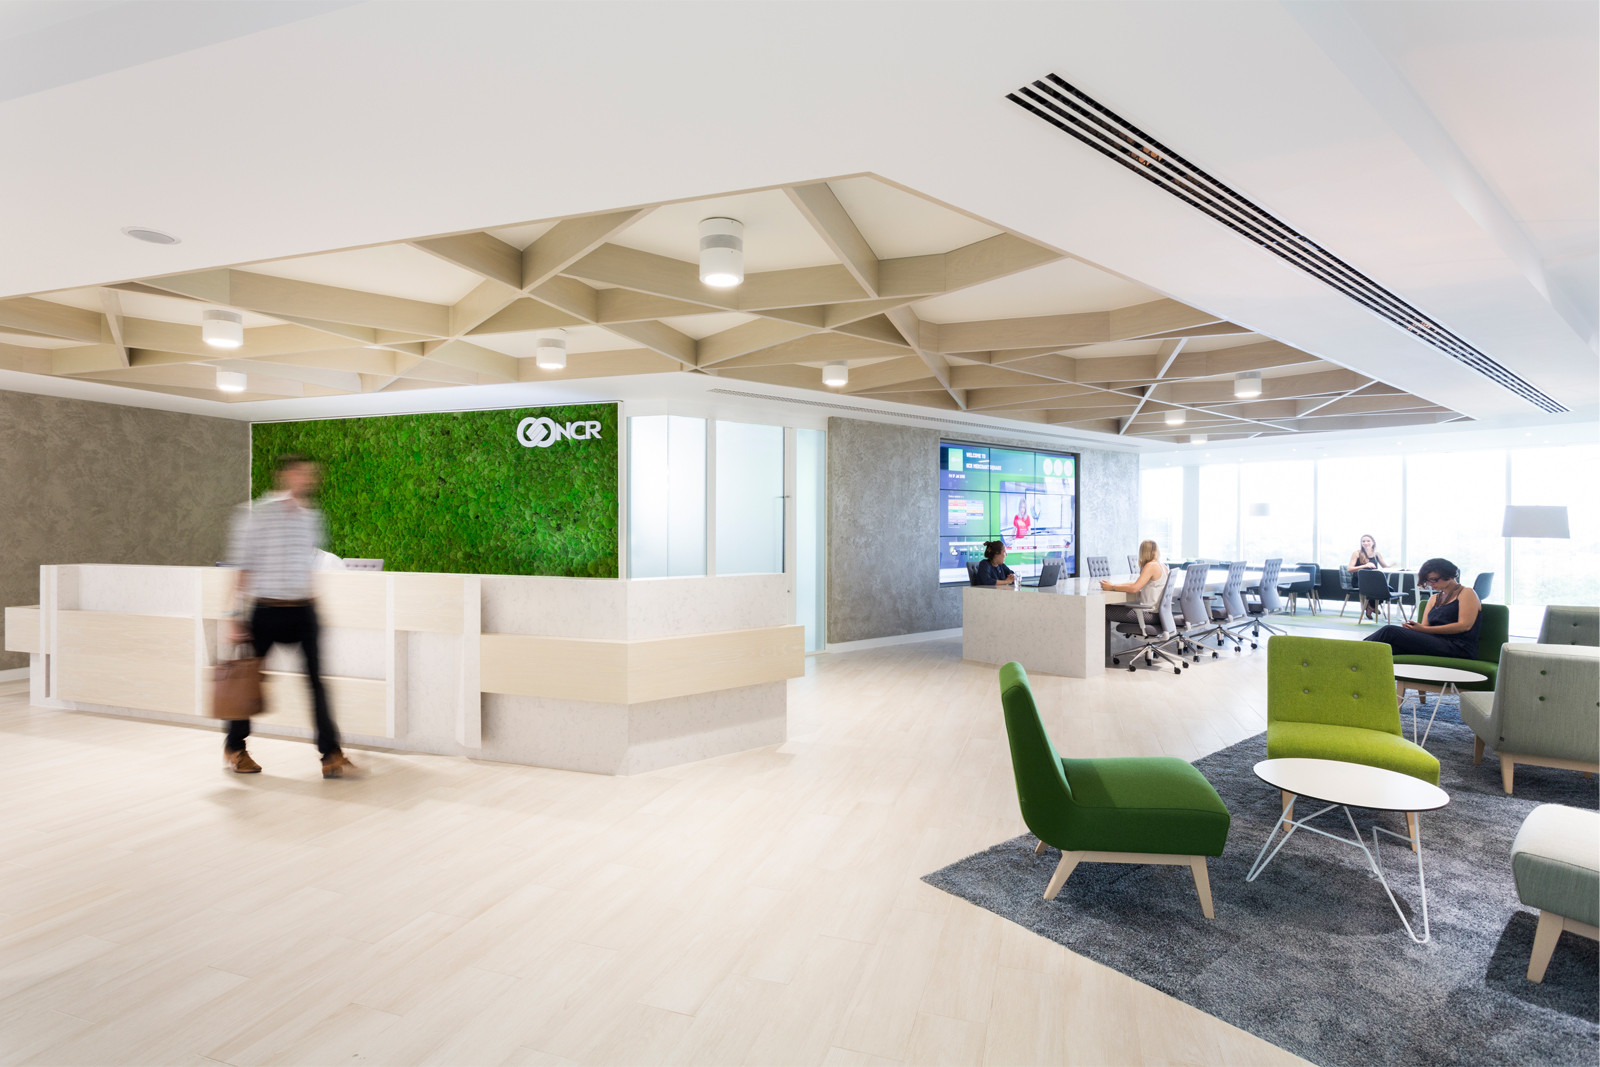 NCR, London uses biophilic design principles. Anna Breheny worked on this project while at Scott Brownrigg in the UK. Photo by Phillip Durrant.